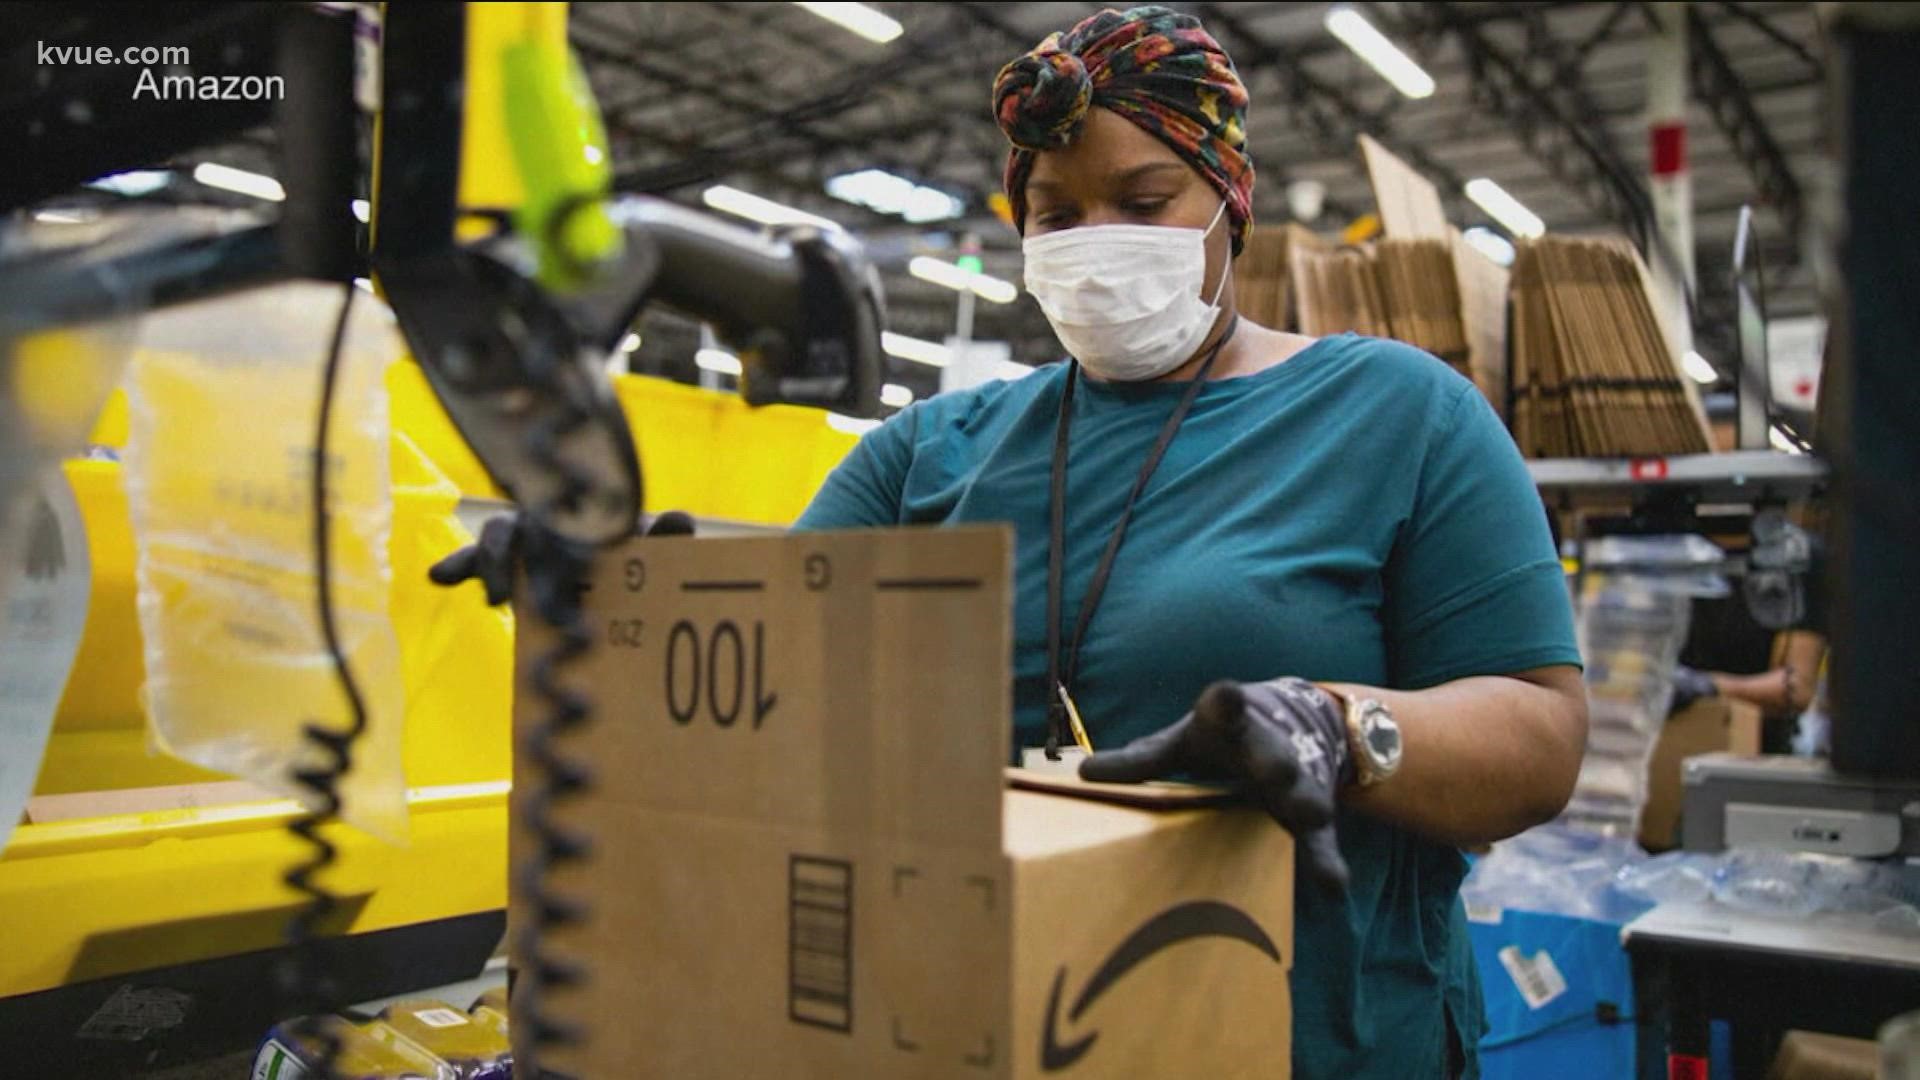 Amazon continues to expand its footprint in Central Texas.